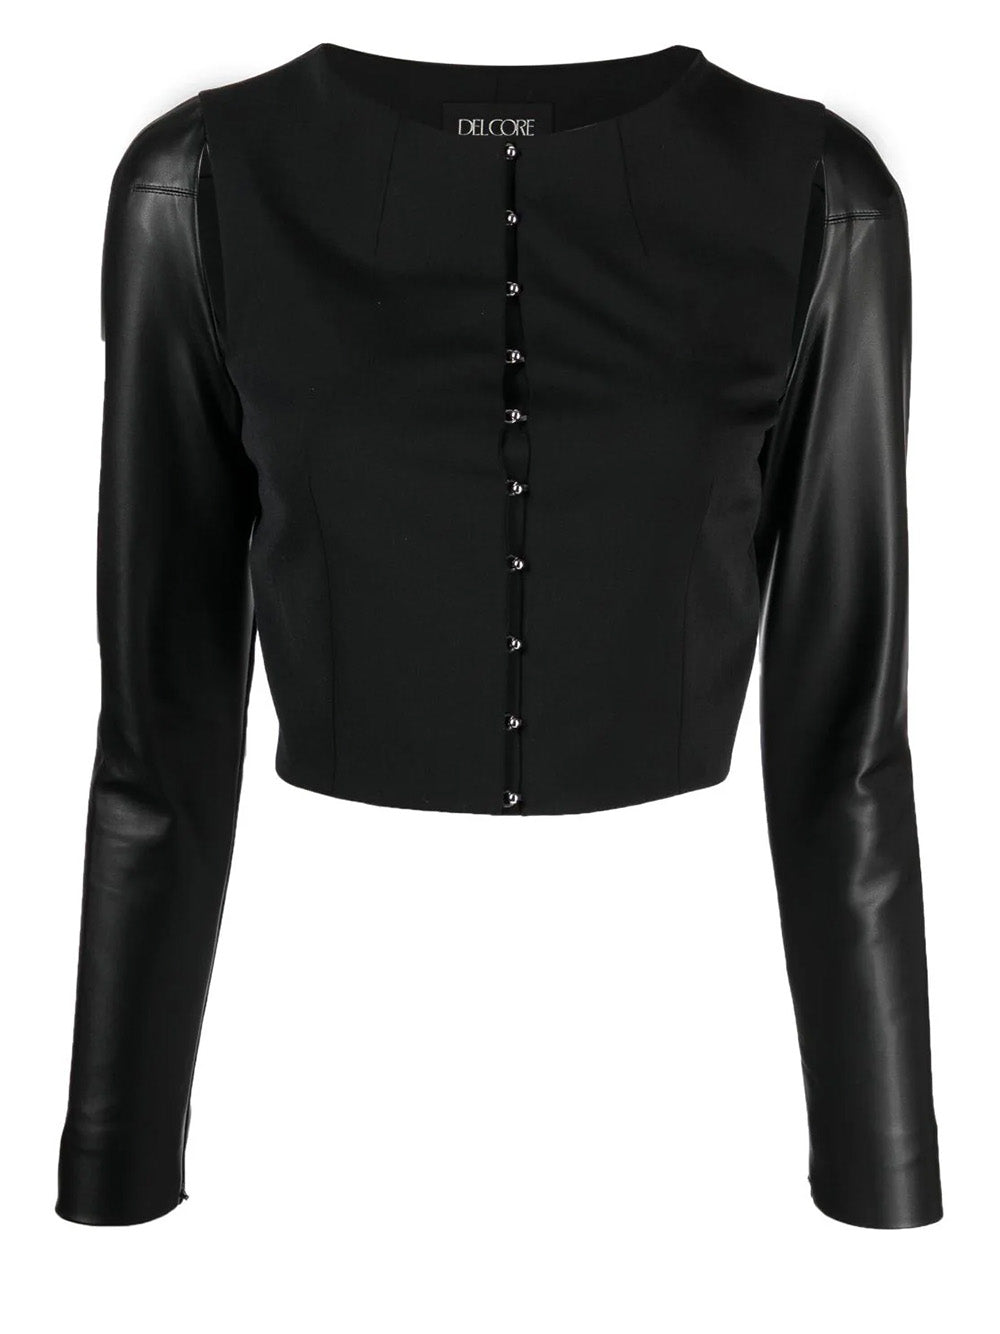    Del-Core-Tailored-Top-With-Leather-Sleeve-Black-1